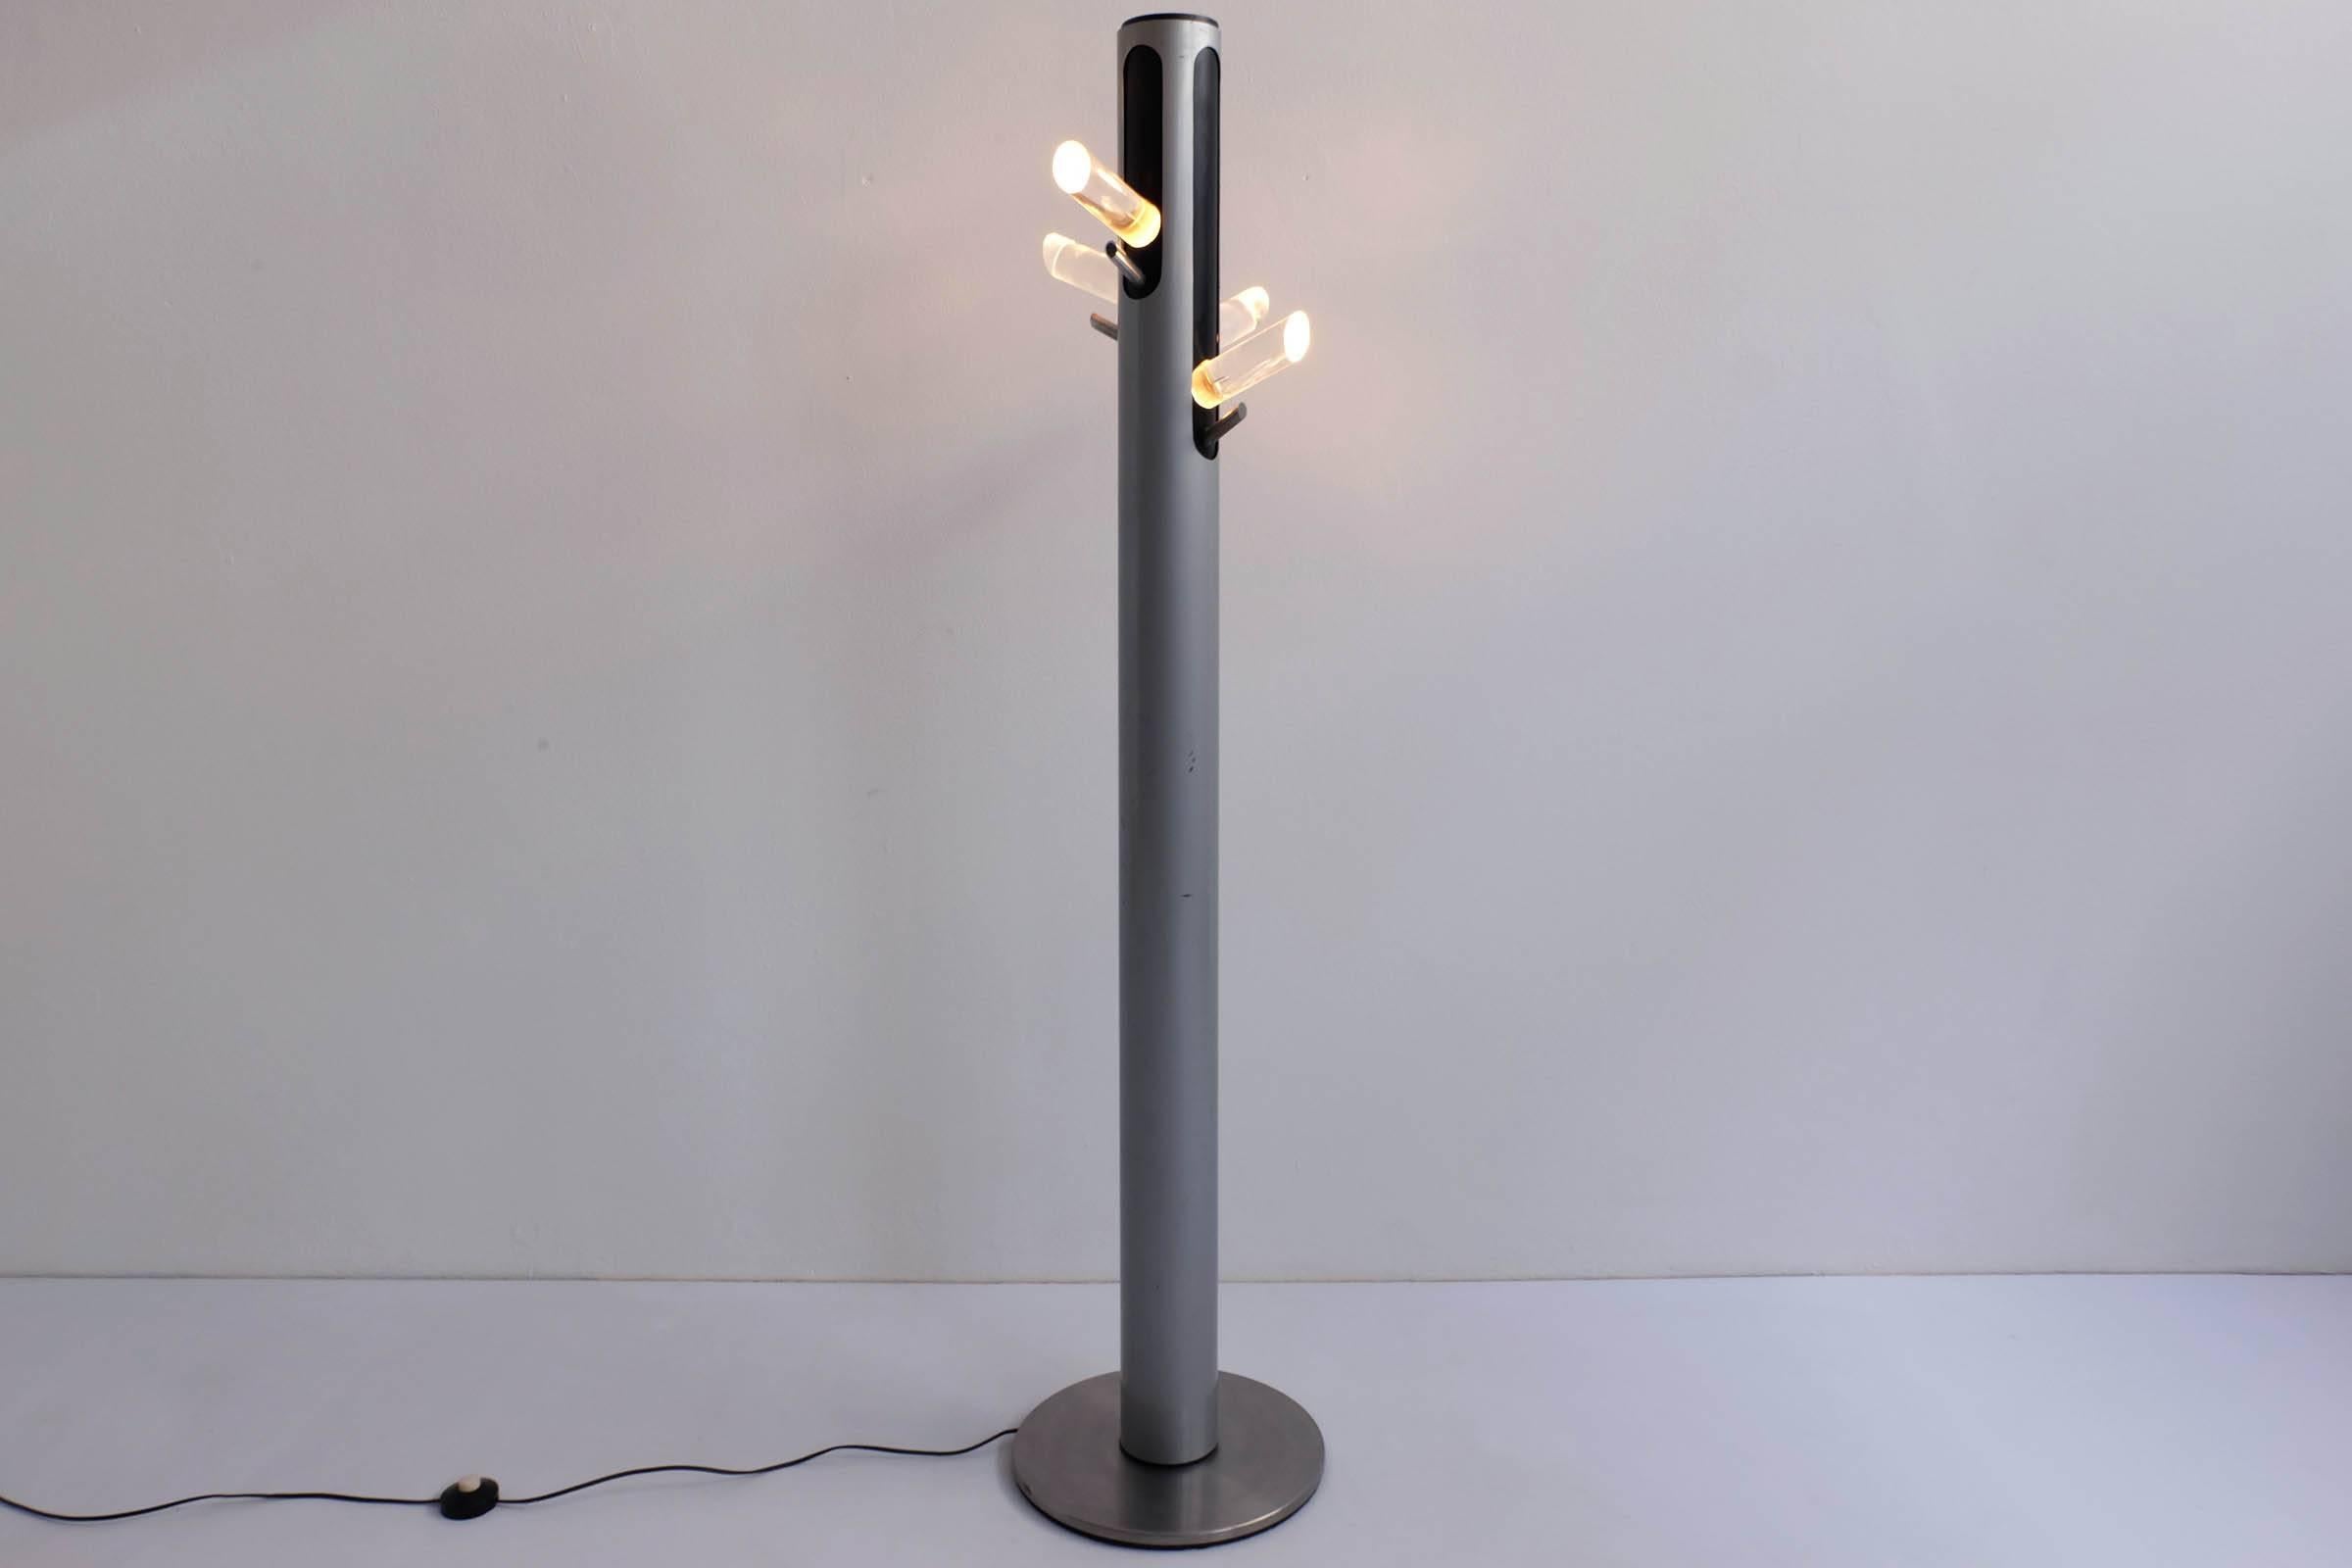 Sculptural illuminated coat rack that can be used as a floor lamp as well.